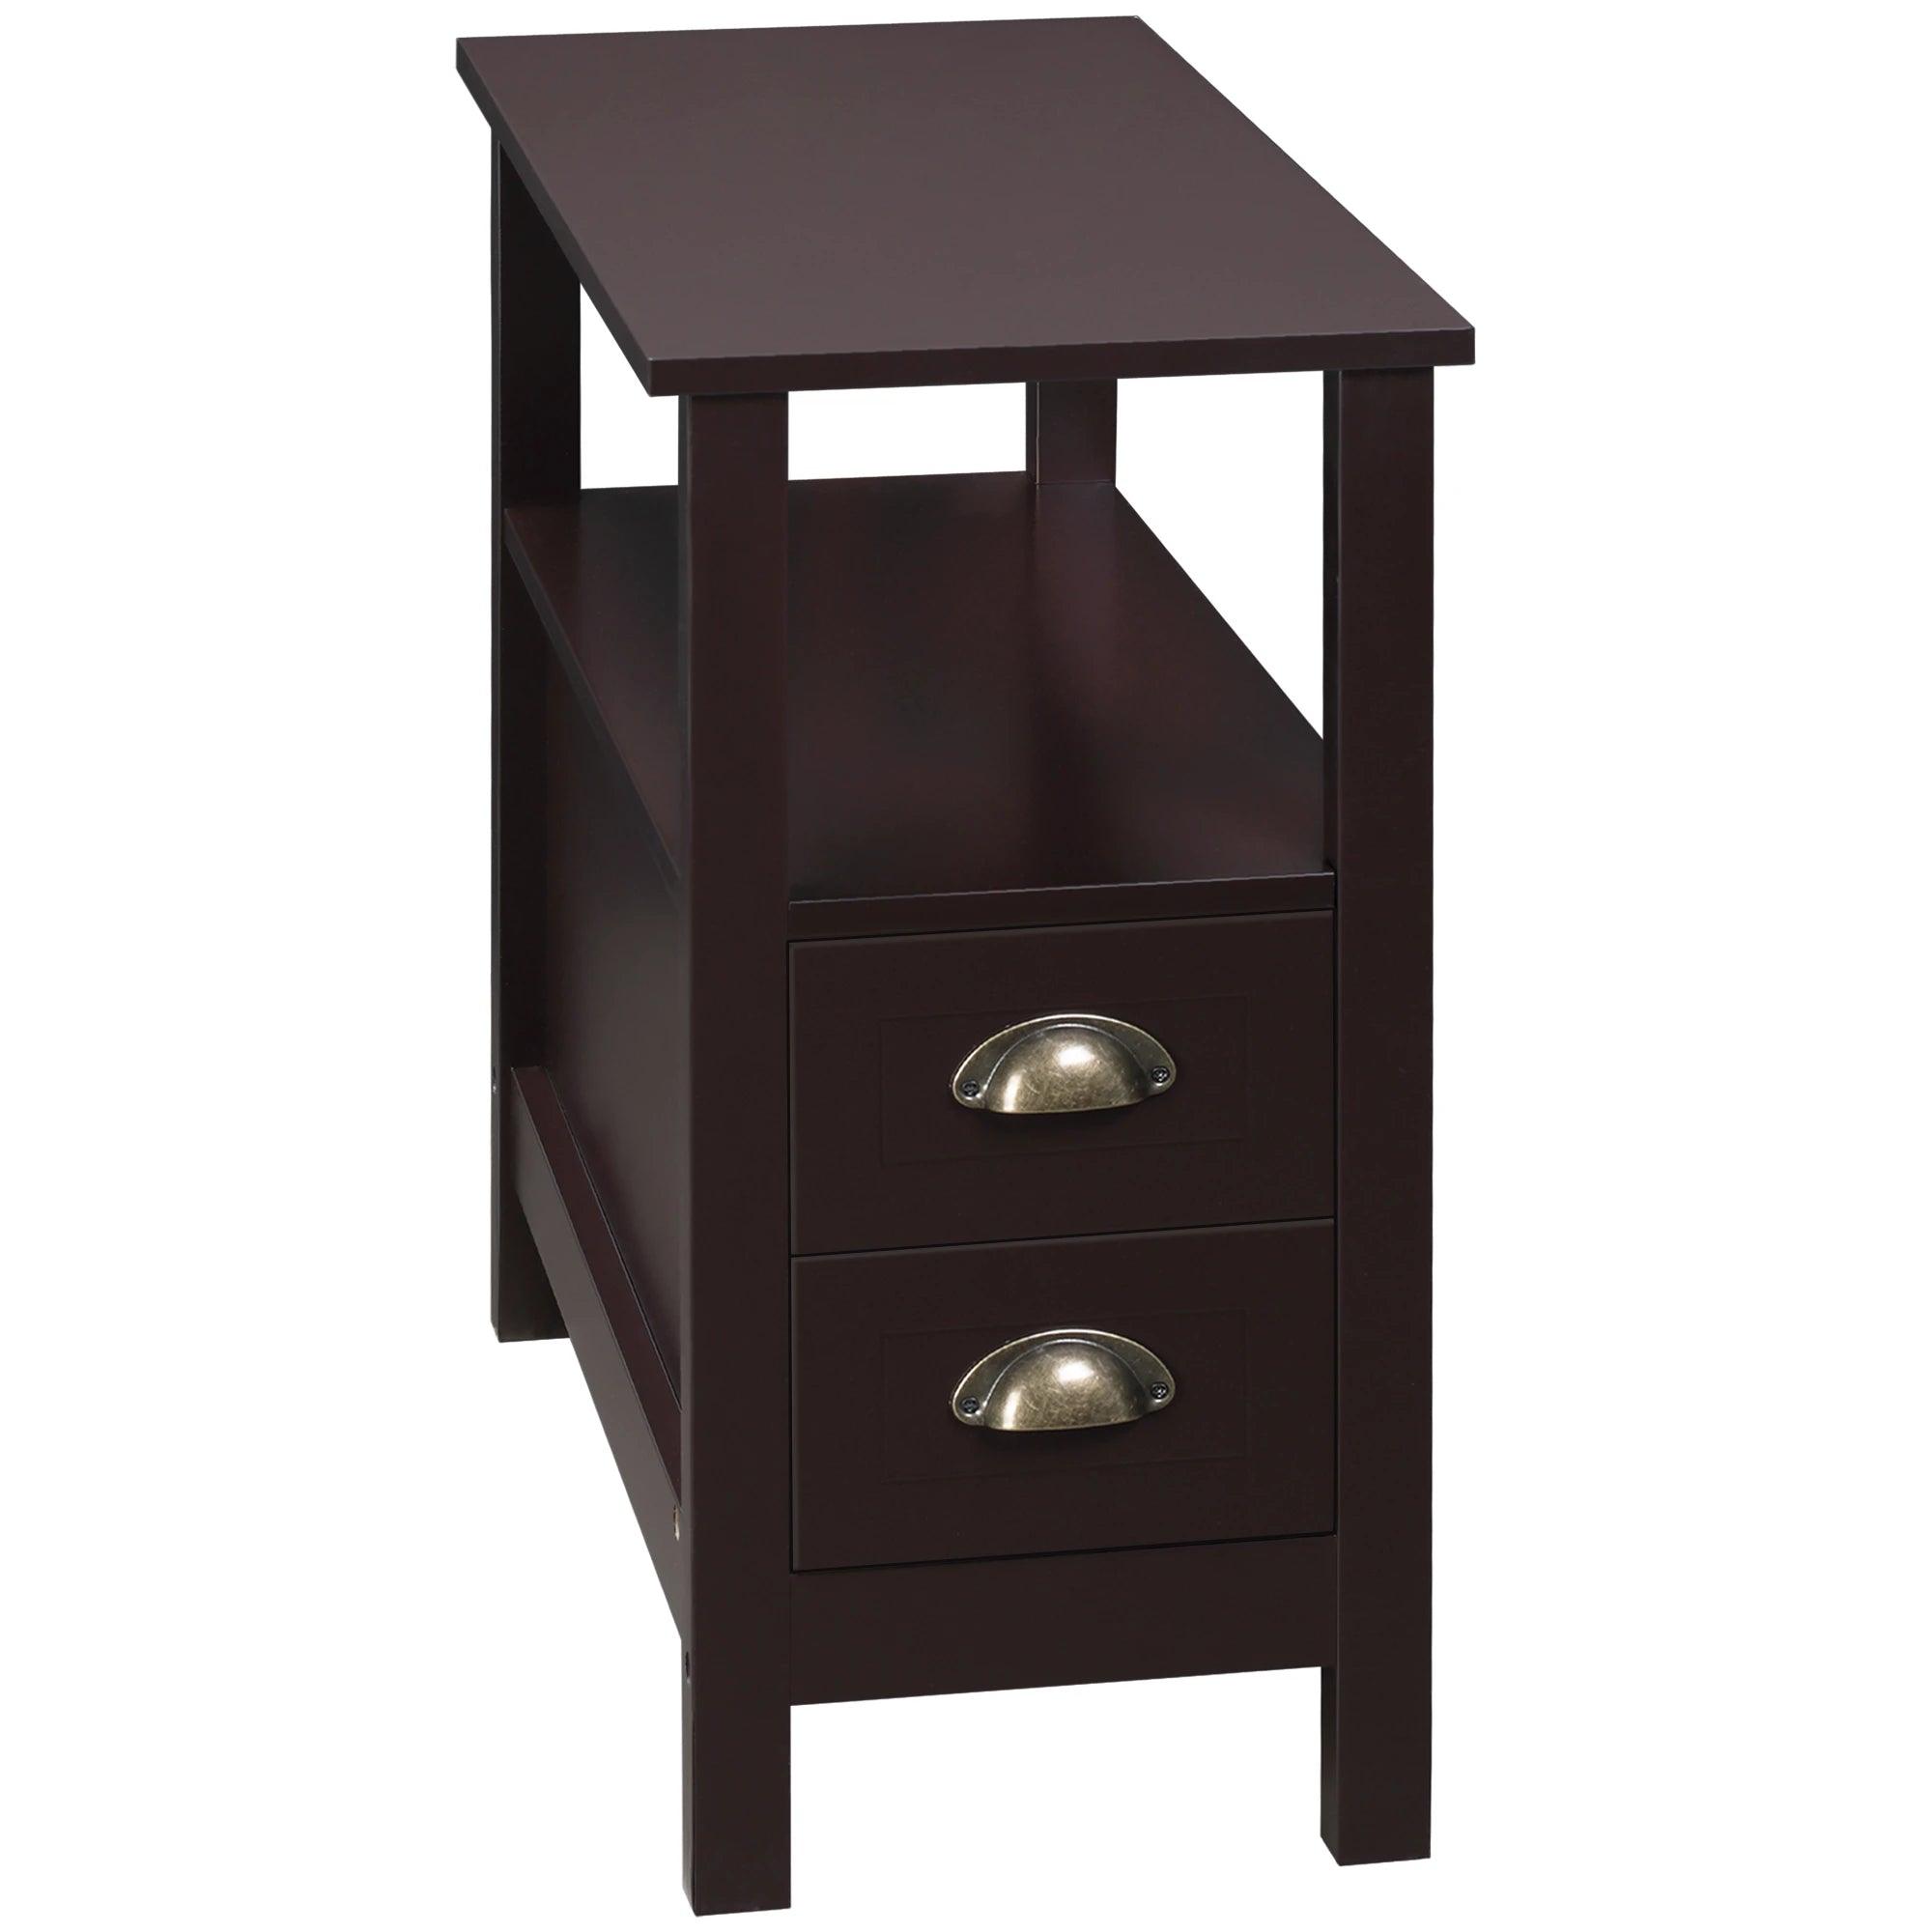 Slim End Table with 2 Drawers and Storage Shelf, Sofa Side Table for Living Room, Narrow Nightstand, Coffee